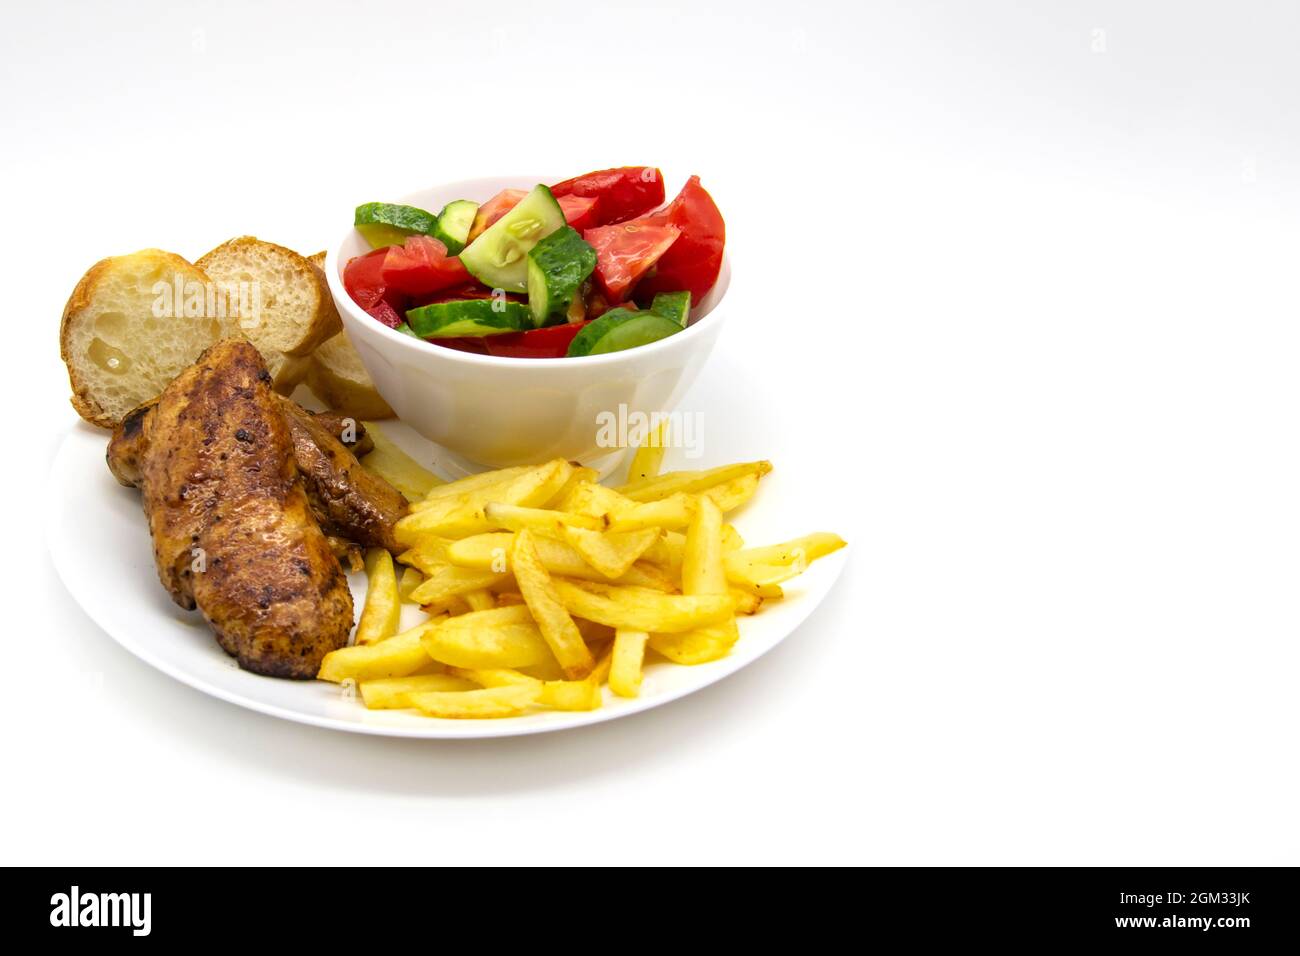 Fried chicken breast with fries, slices of bread and salad in a white plate on a light background. Fresh salad with cucumbers and tomatoes. Very tasty Stock Photo